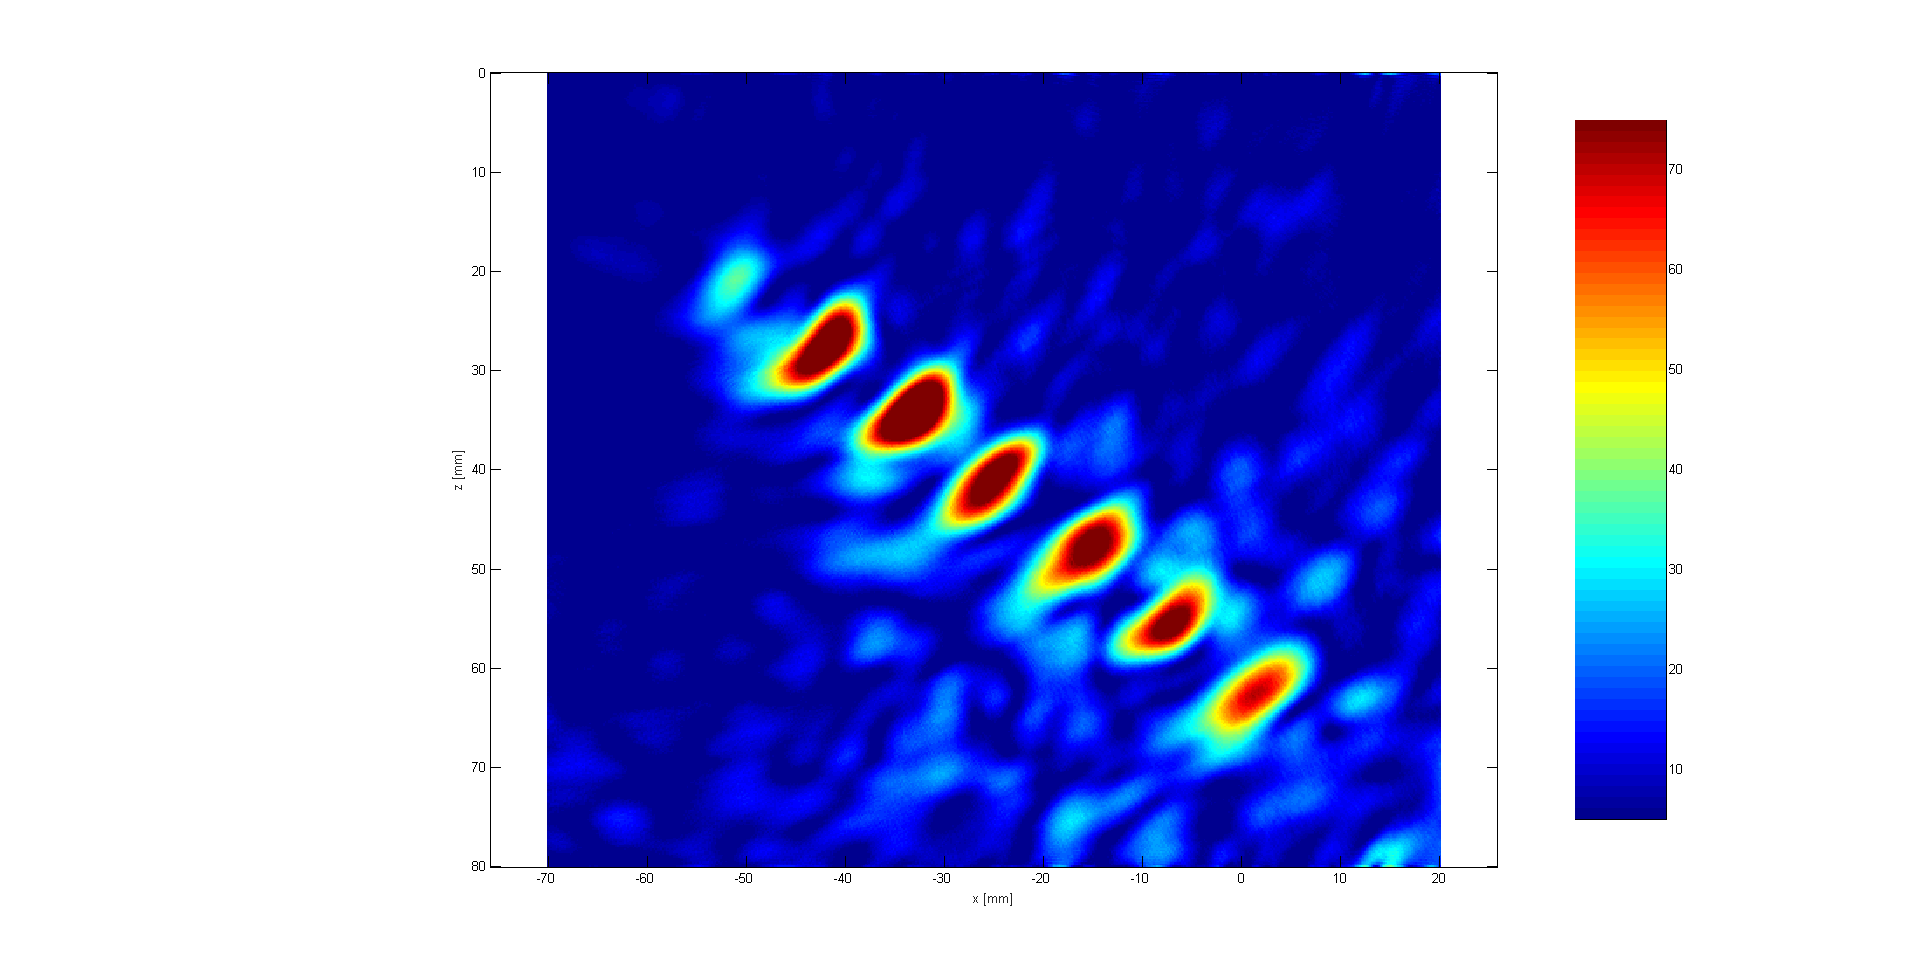 Image of notches using 1 MHz probe